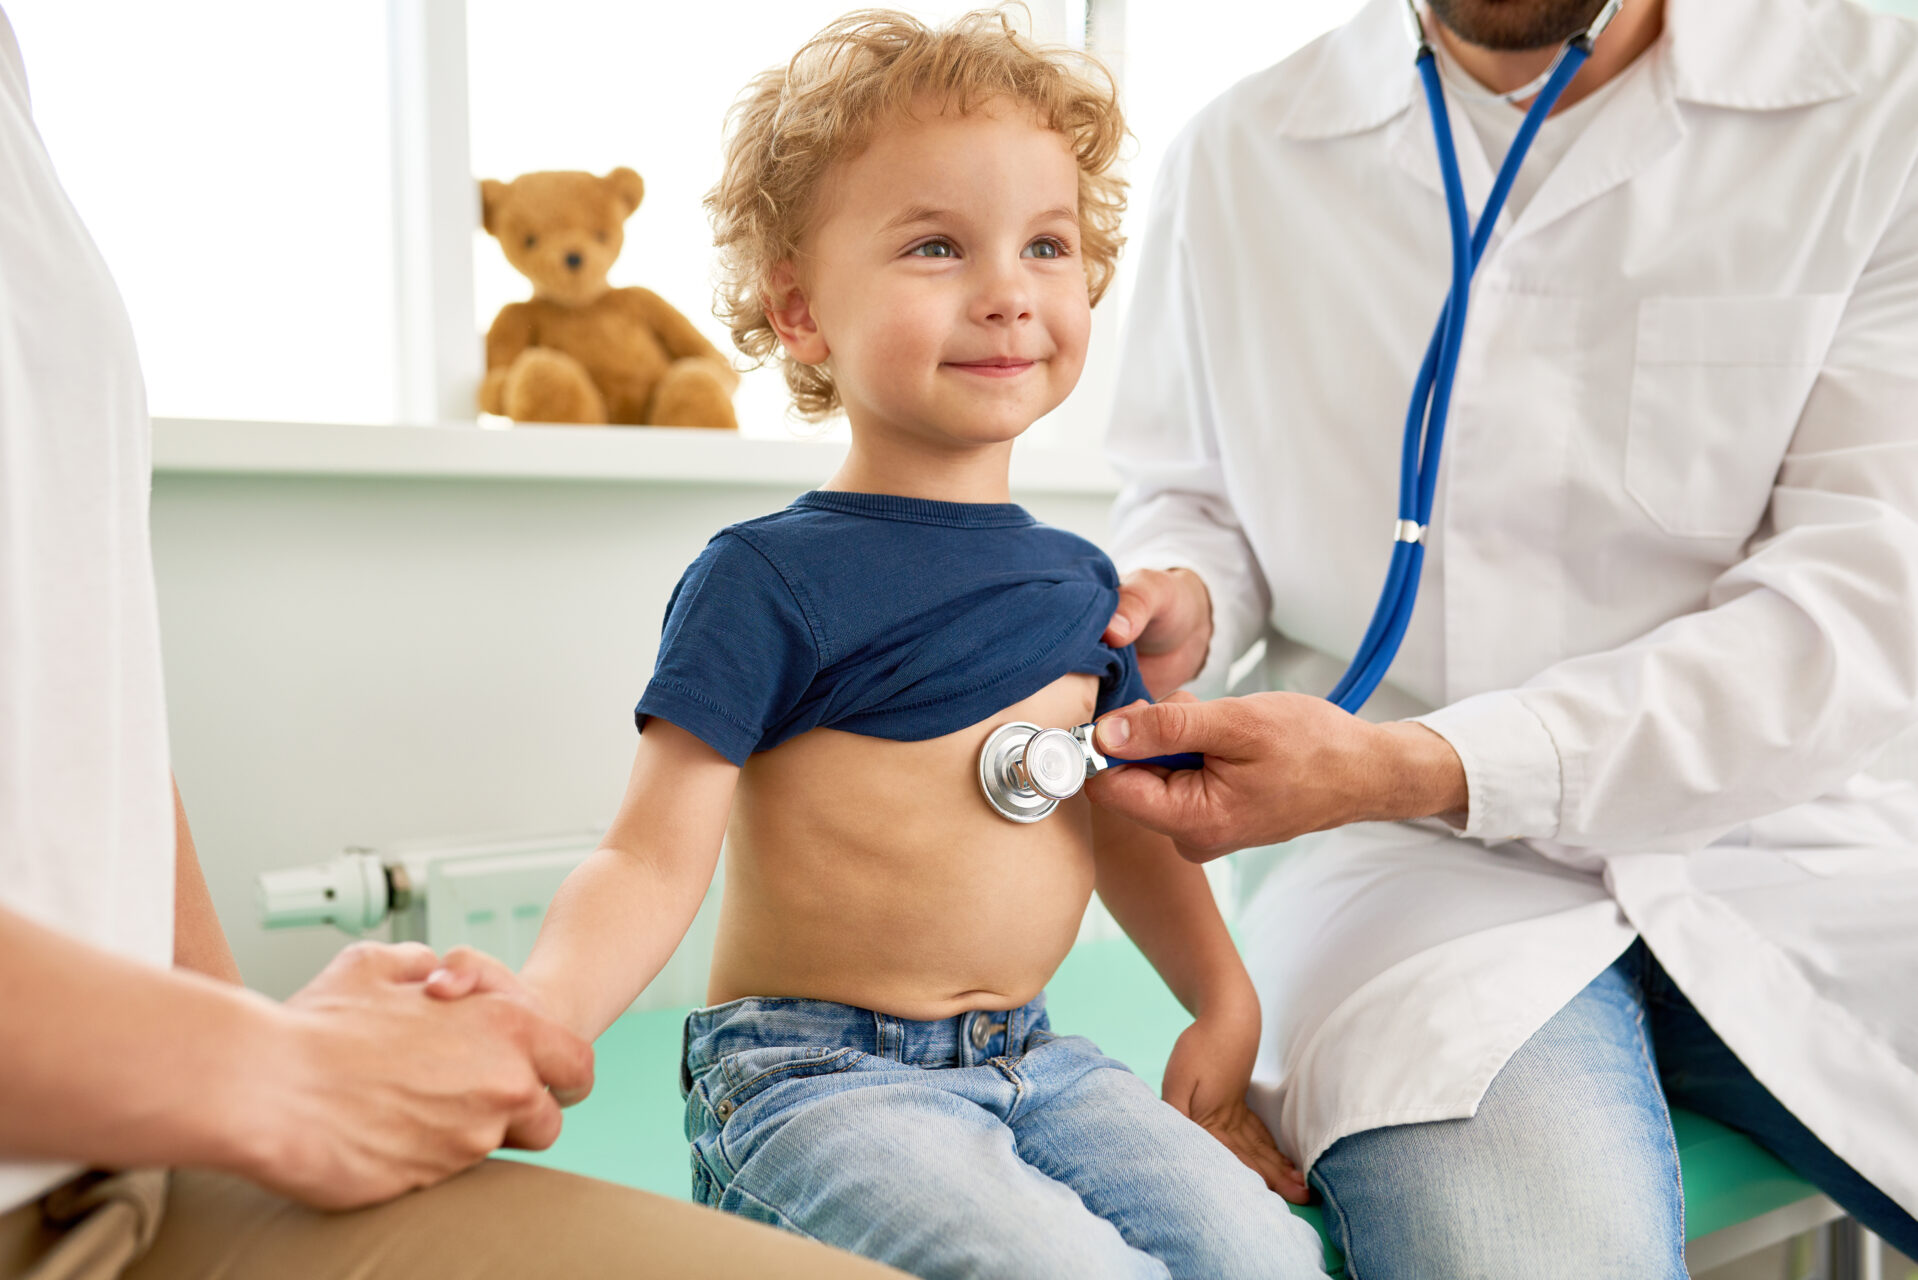 A small child getting a medical check-up. He is sitting on a doctor's table, in-between two adults. One adult is holding the boy's shirt up and listening to his chest with a stethoscope. The other adult is holding the child's hand.